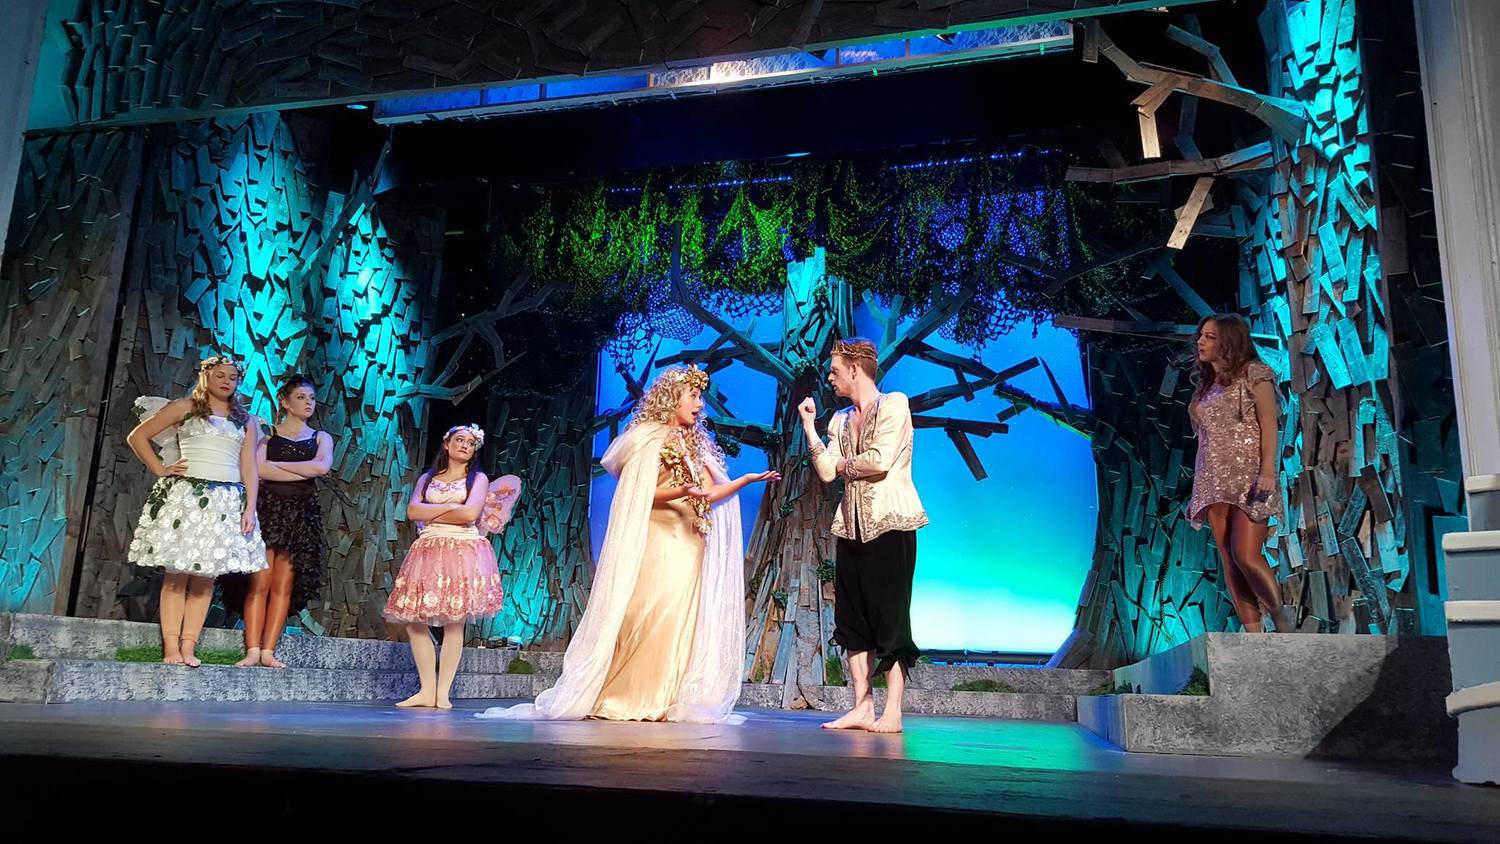 Elizabeth O Brien and Chris Lorenc square off as fairy queen and king, Titania and Oberon, as the fairies (Gina Teschke, Rebecca Madiera, Claudia Noto) and Puck (Mikayla Petrilla) lend their support to their leaders in this iconic scene from 